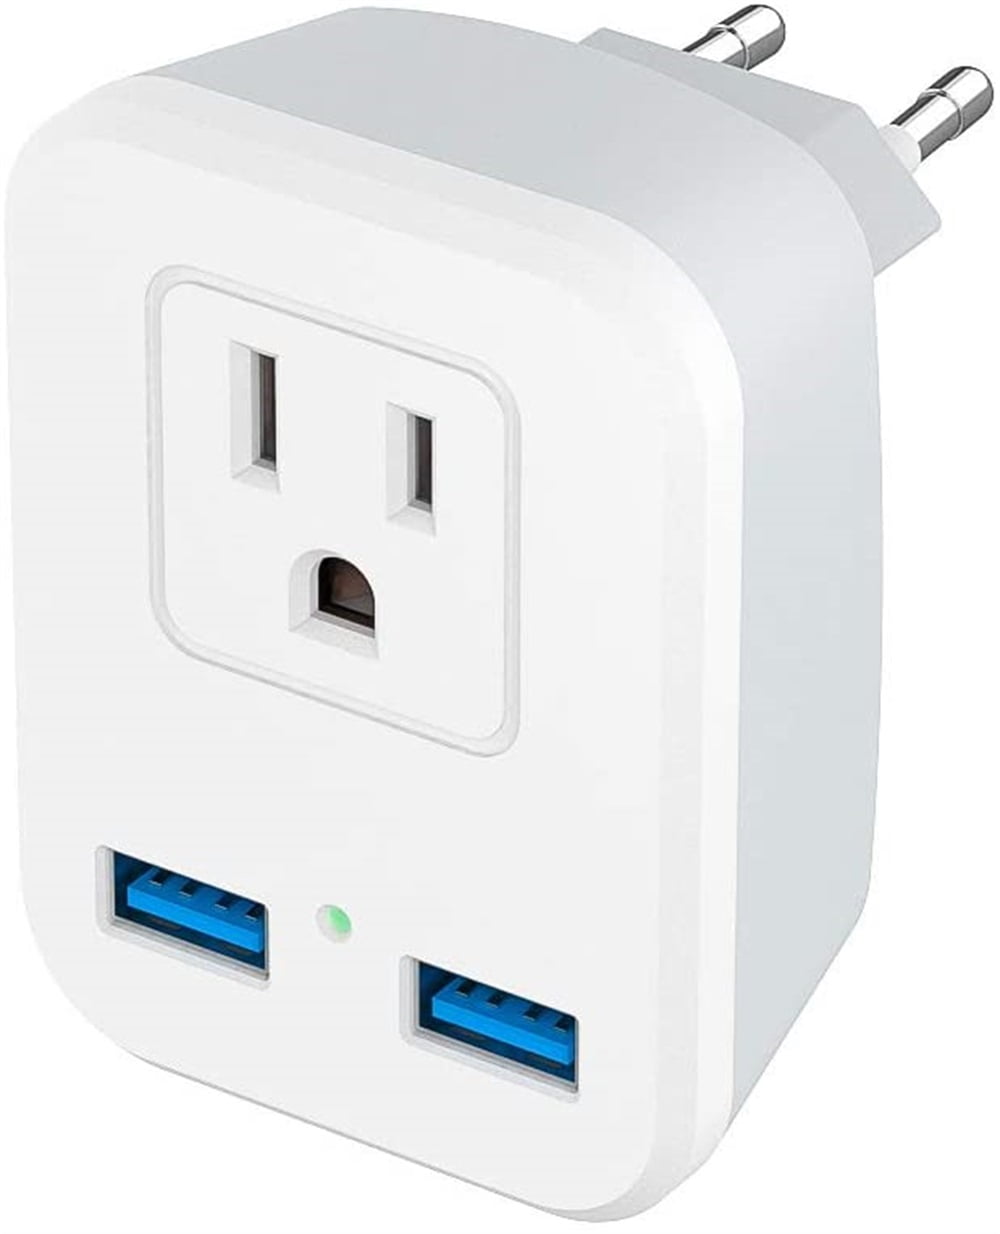 European International Travel Adapter EU Plug Converter Wall Charger with AC Outlet Dual USB, US to Most of Europe France Germany Iceland Italy (Type C) - Walmart.com